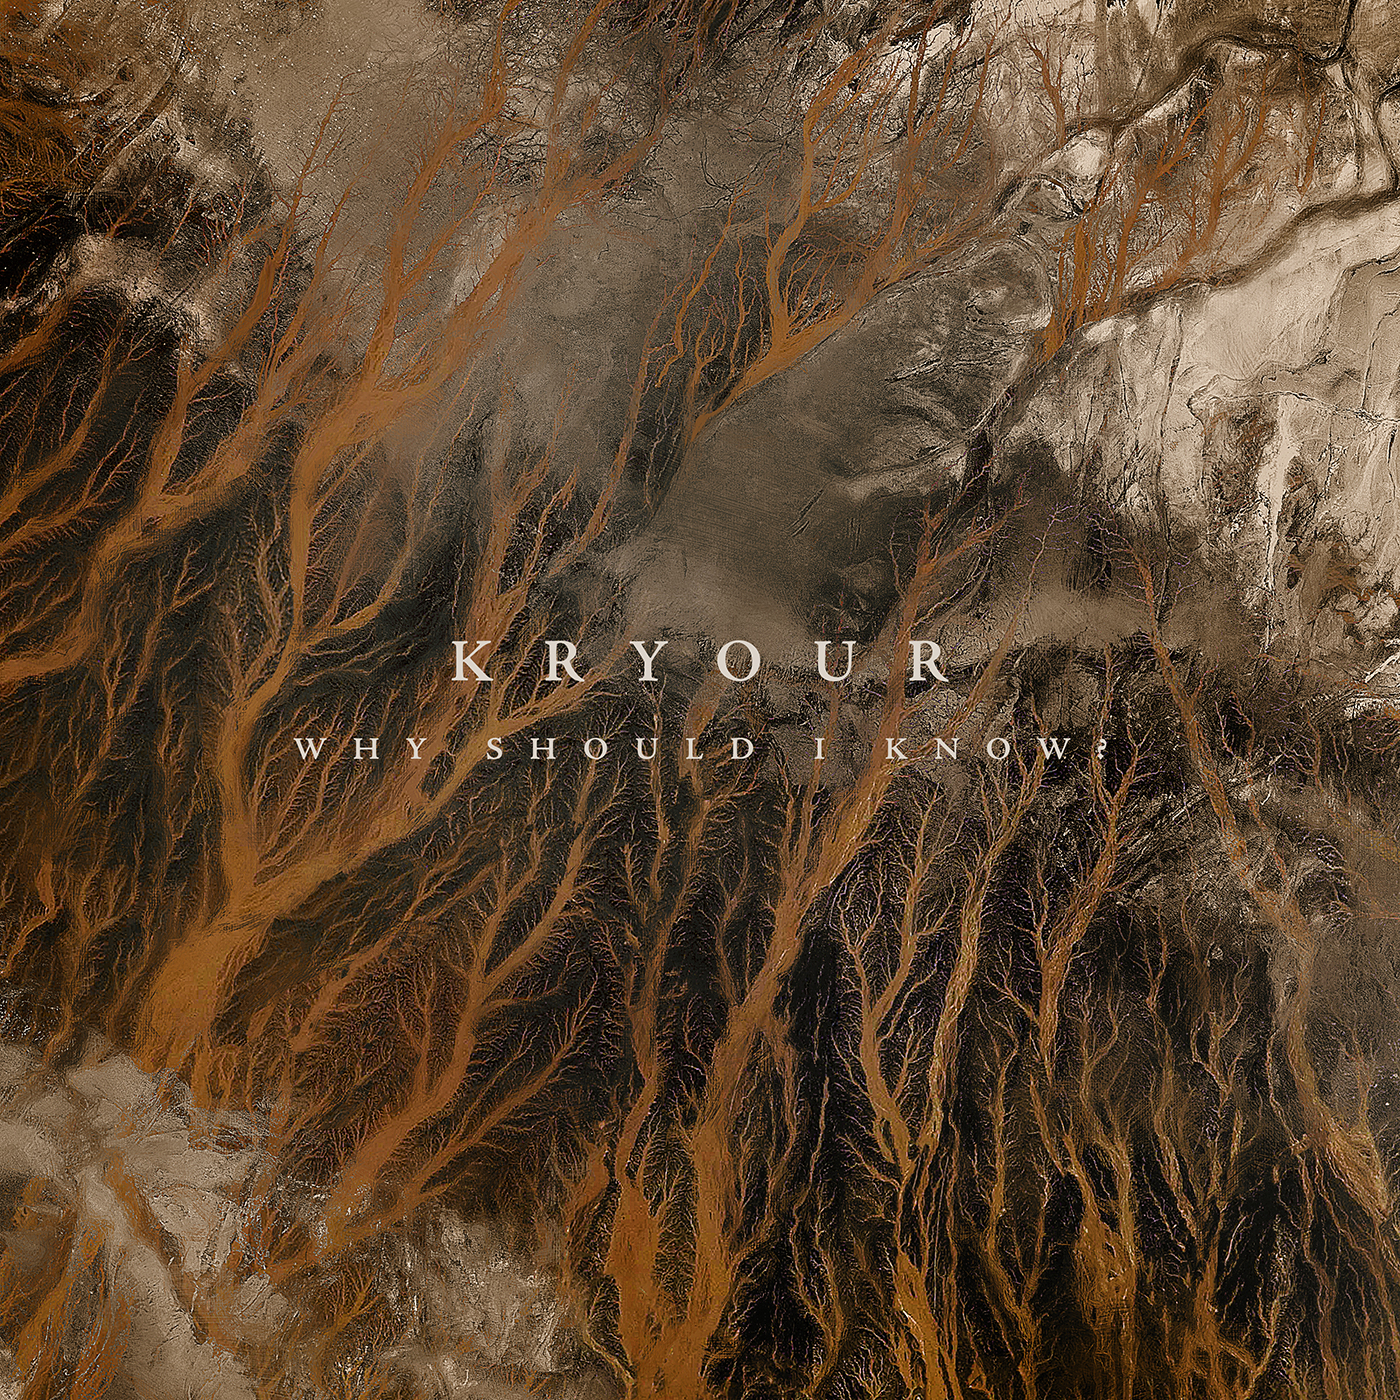 Brazillian metal band ‘Kryour’ present fans with a sound rich in influences on new single “Why Should I Know?”.